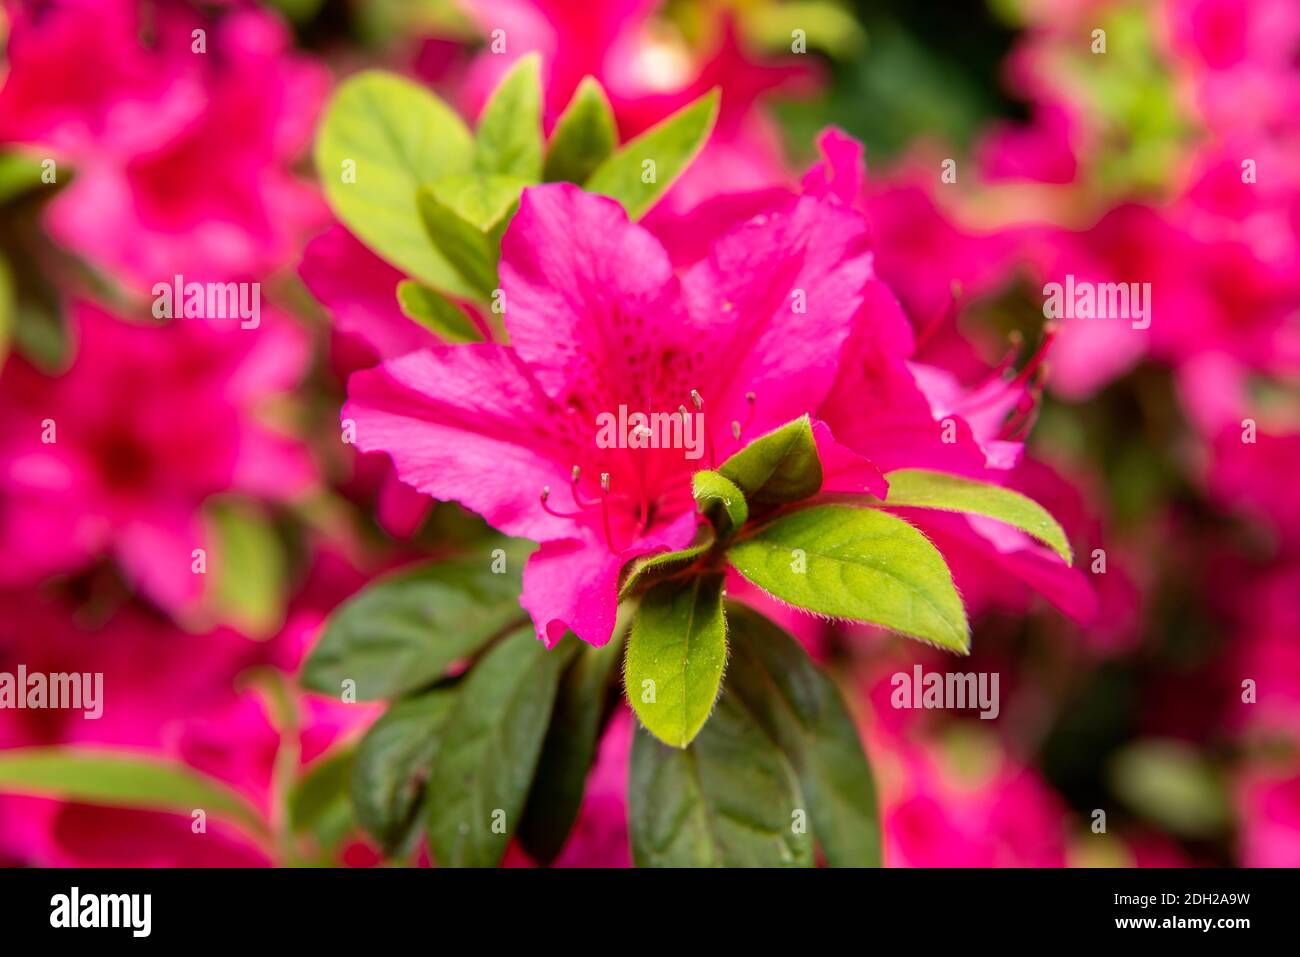 Rhododendron flower Stock Photo